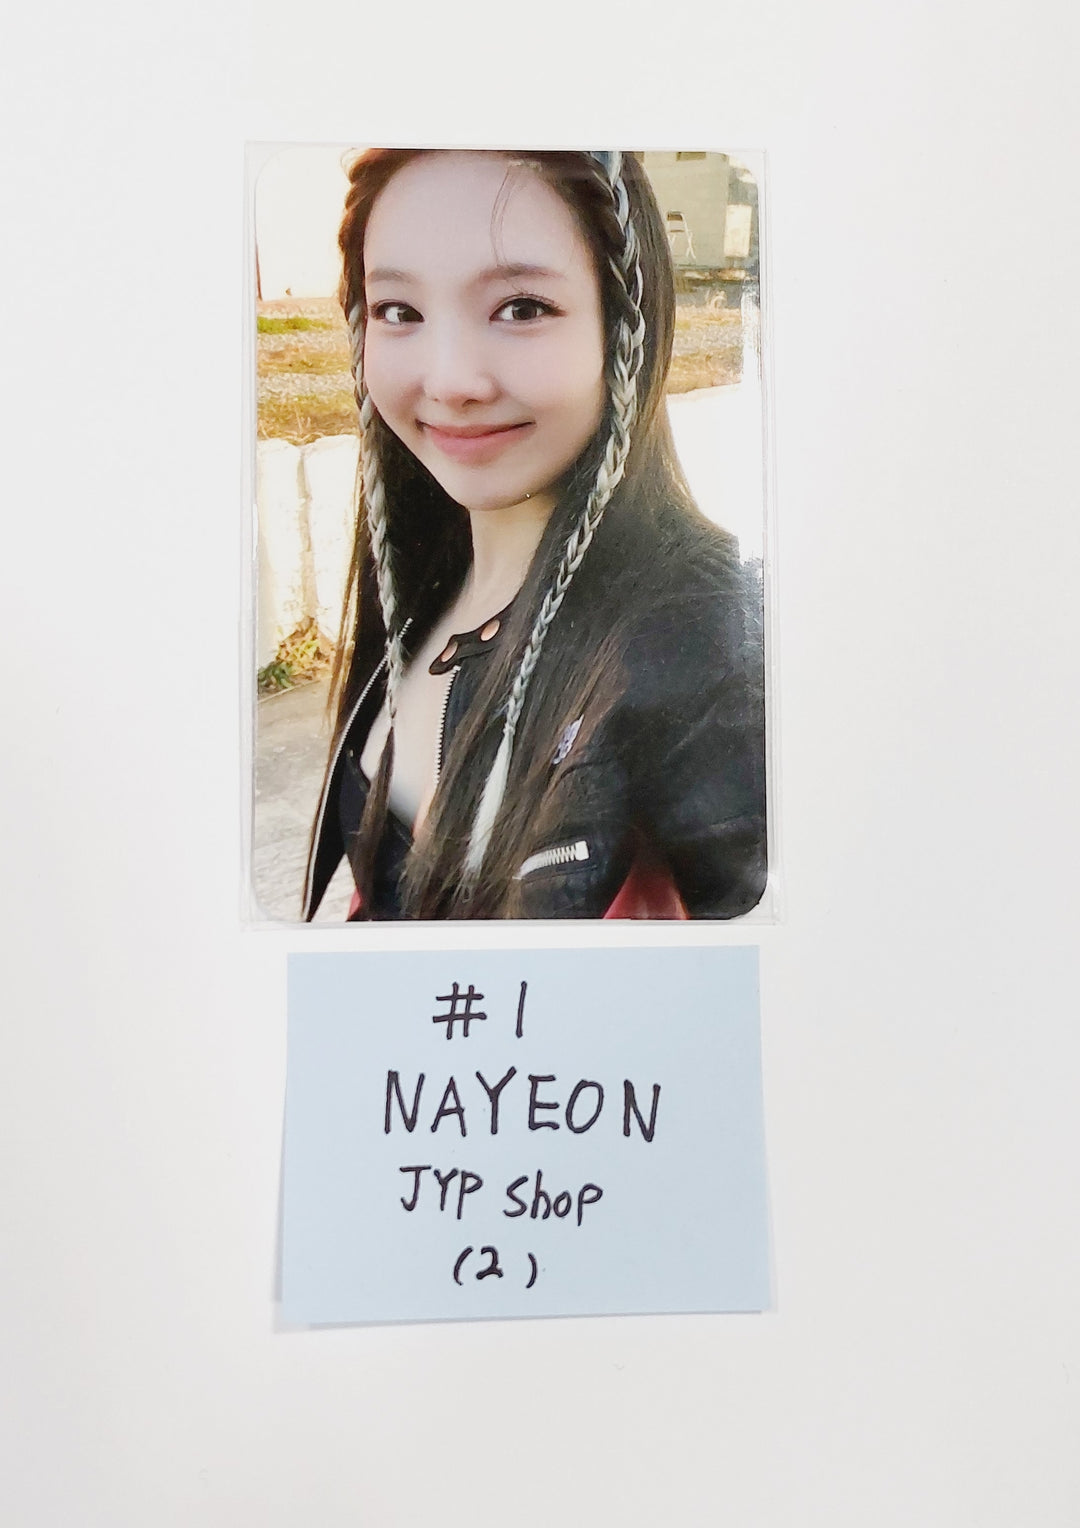 Twice "READY TO BE" - JYP Shop Pre-Order Benefit Photocard (Restocked 3/15)